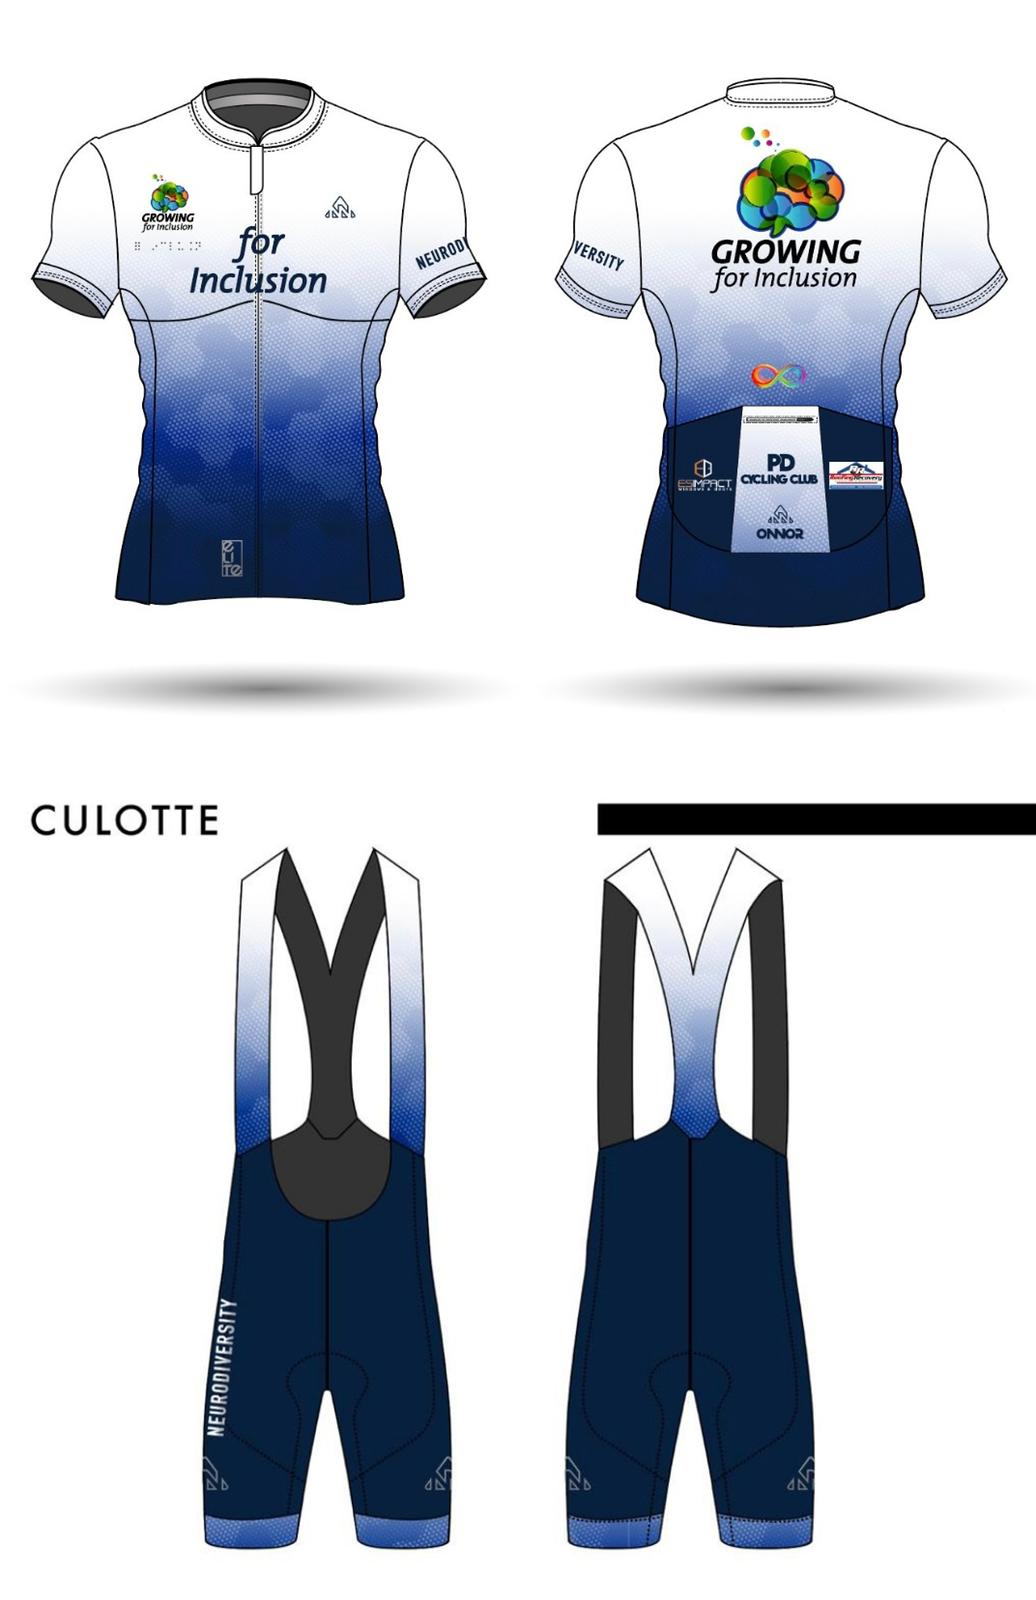 For Inclusion - Jersey and Bib